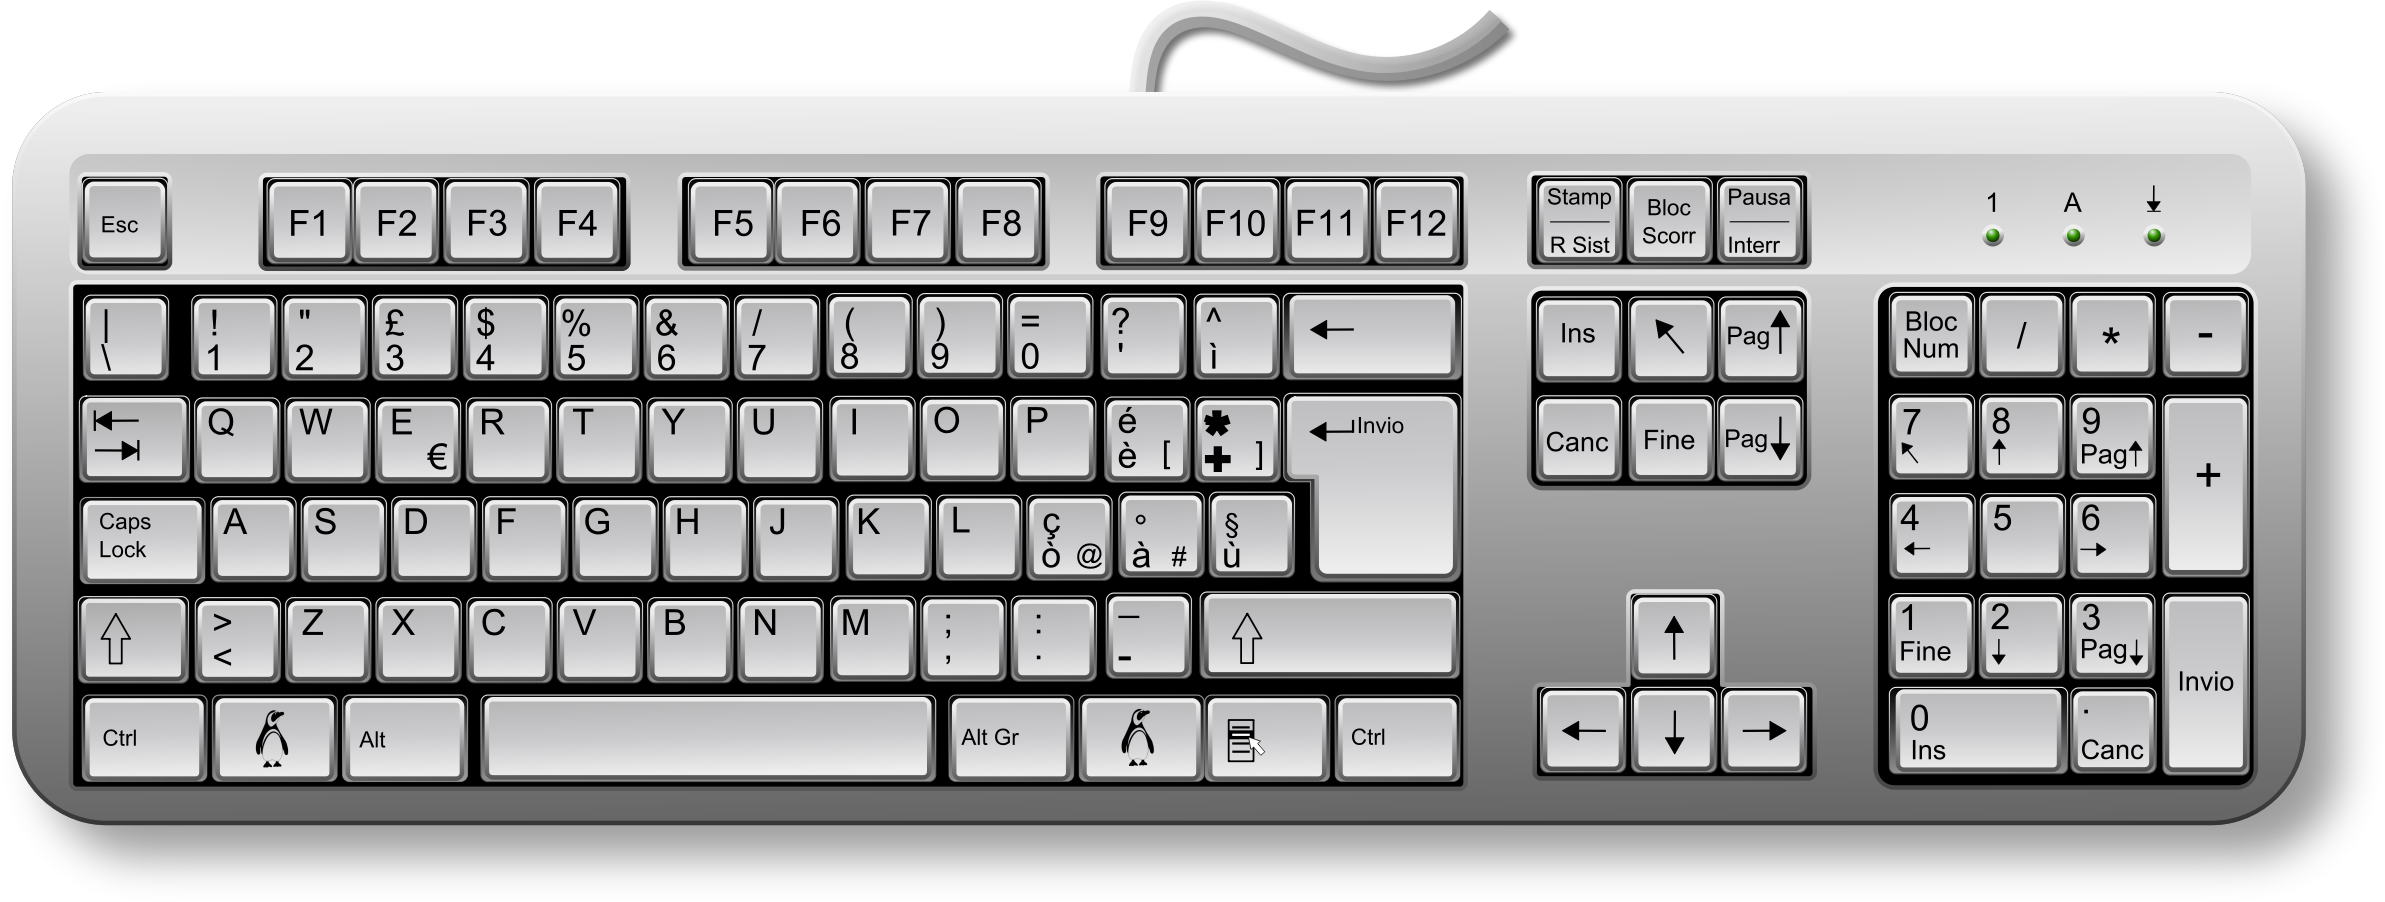 keyboard clipart images - photo #17